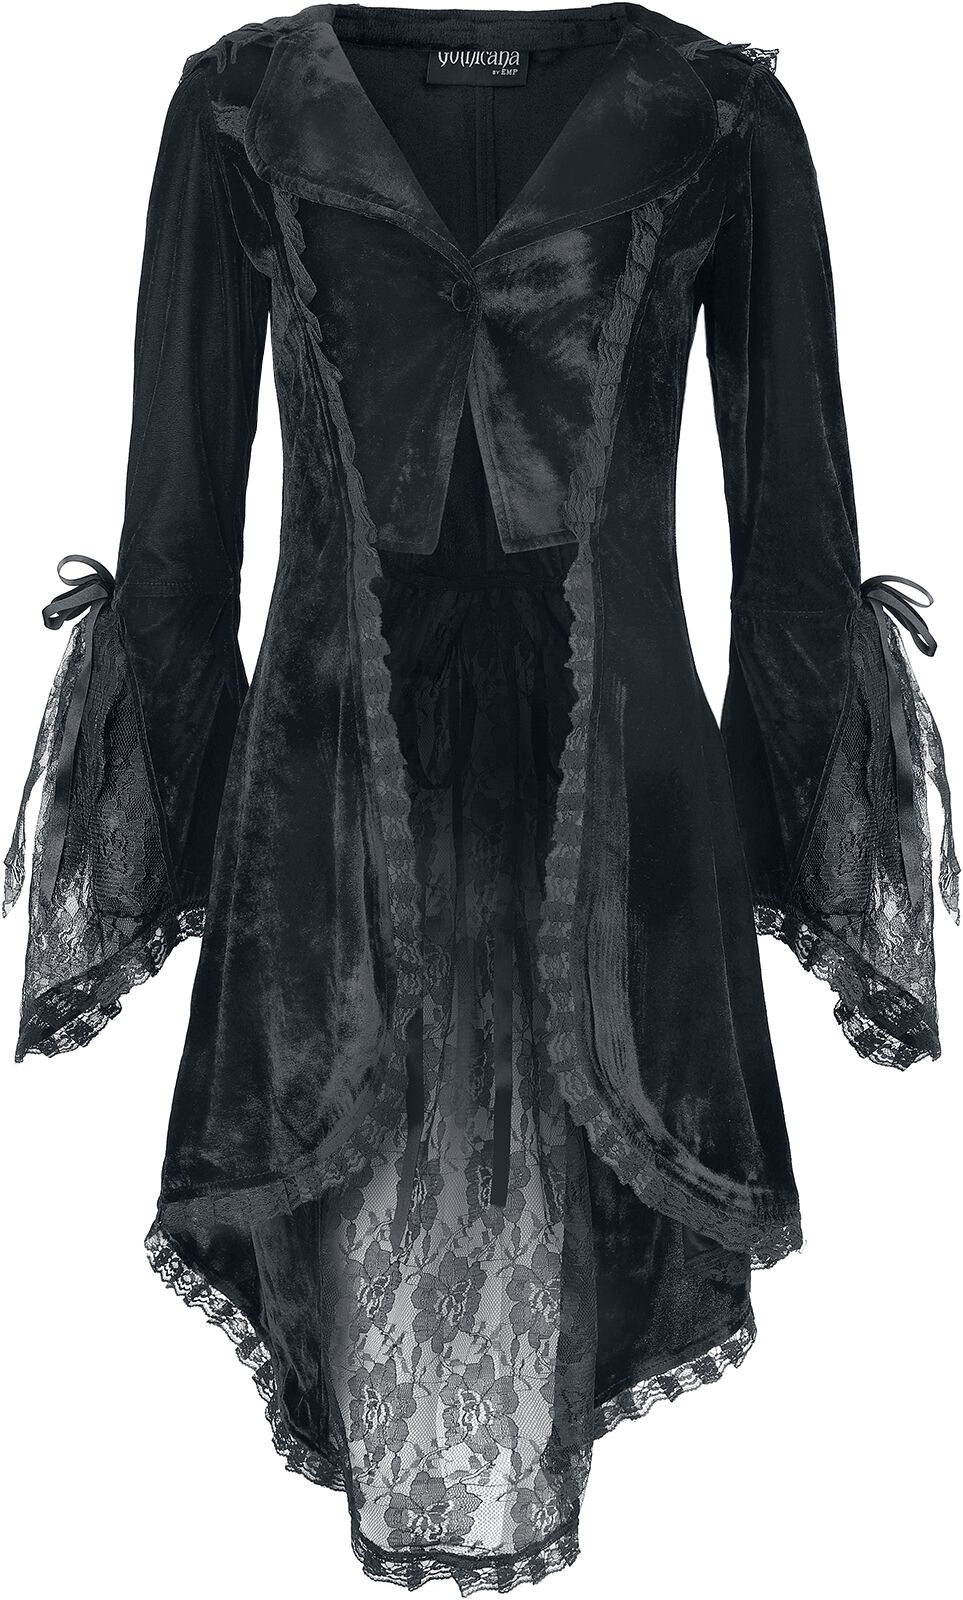 Image of Cardigan Gothic di Gothicana by EMP - Velvet cardigan with lace details - M - Donna - nero